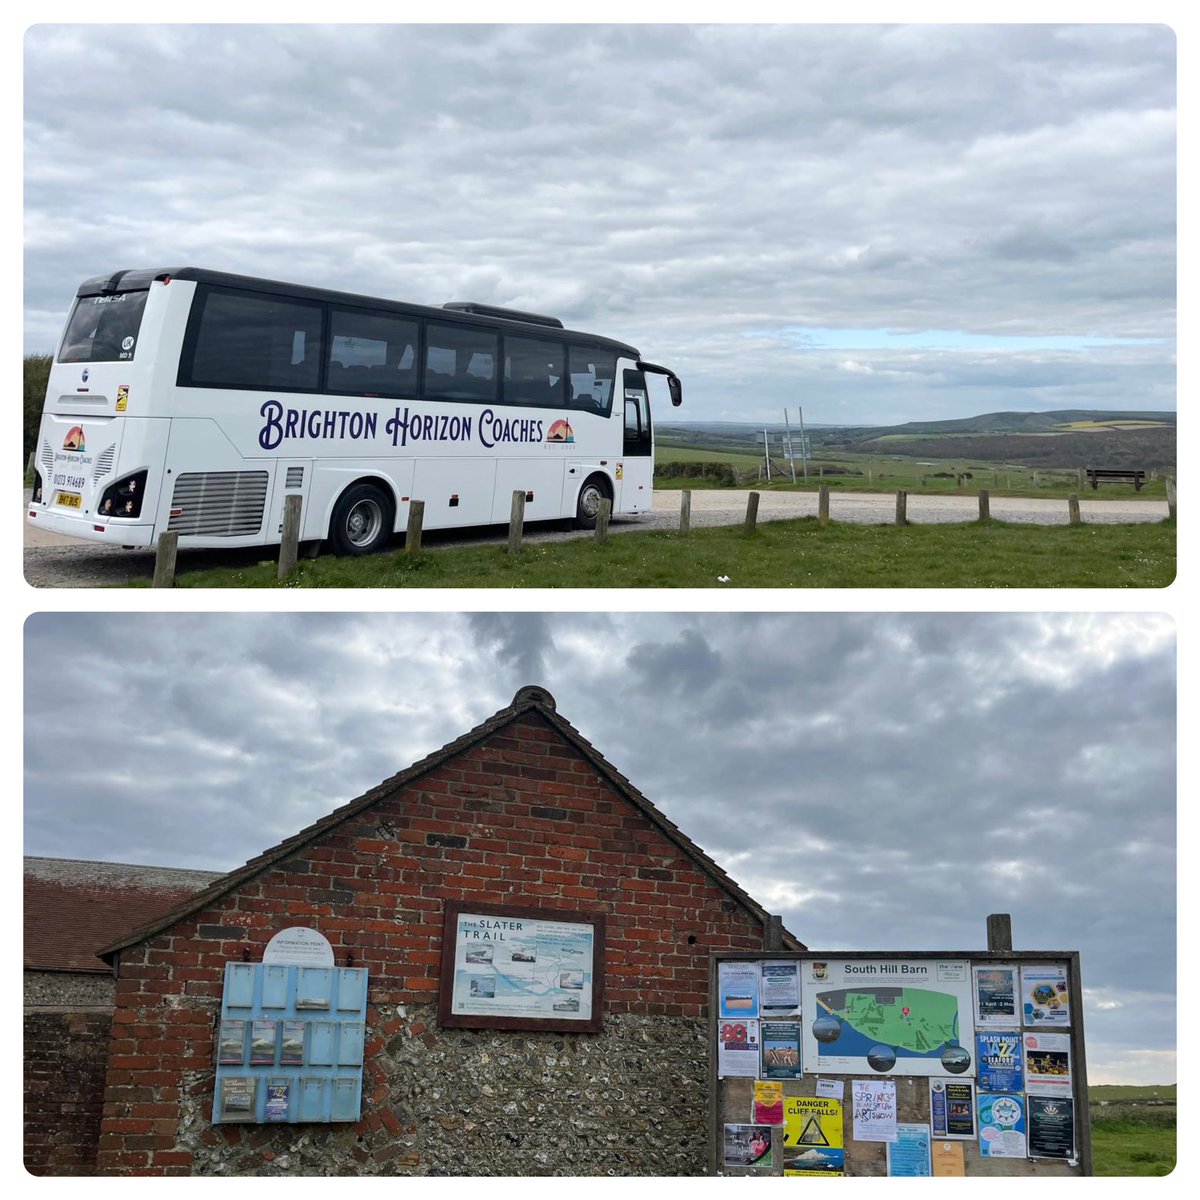 A view up on Seaford Head this afternoon with our Temsa visiting for the last stop of the day before the group is taken back into Brighton #brightonhorizoncoaches #bus #coach #temsa #seaford #brighton #sussex